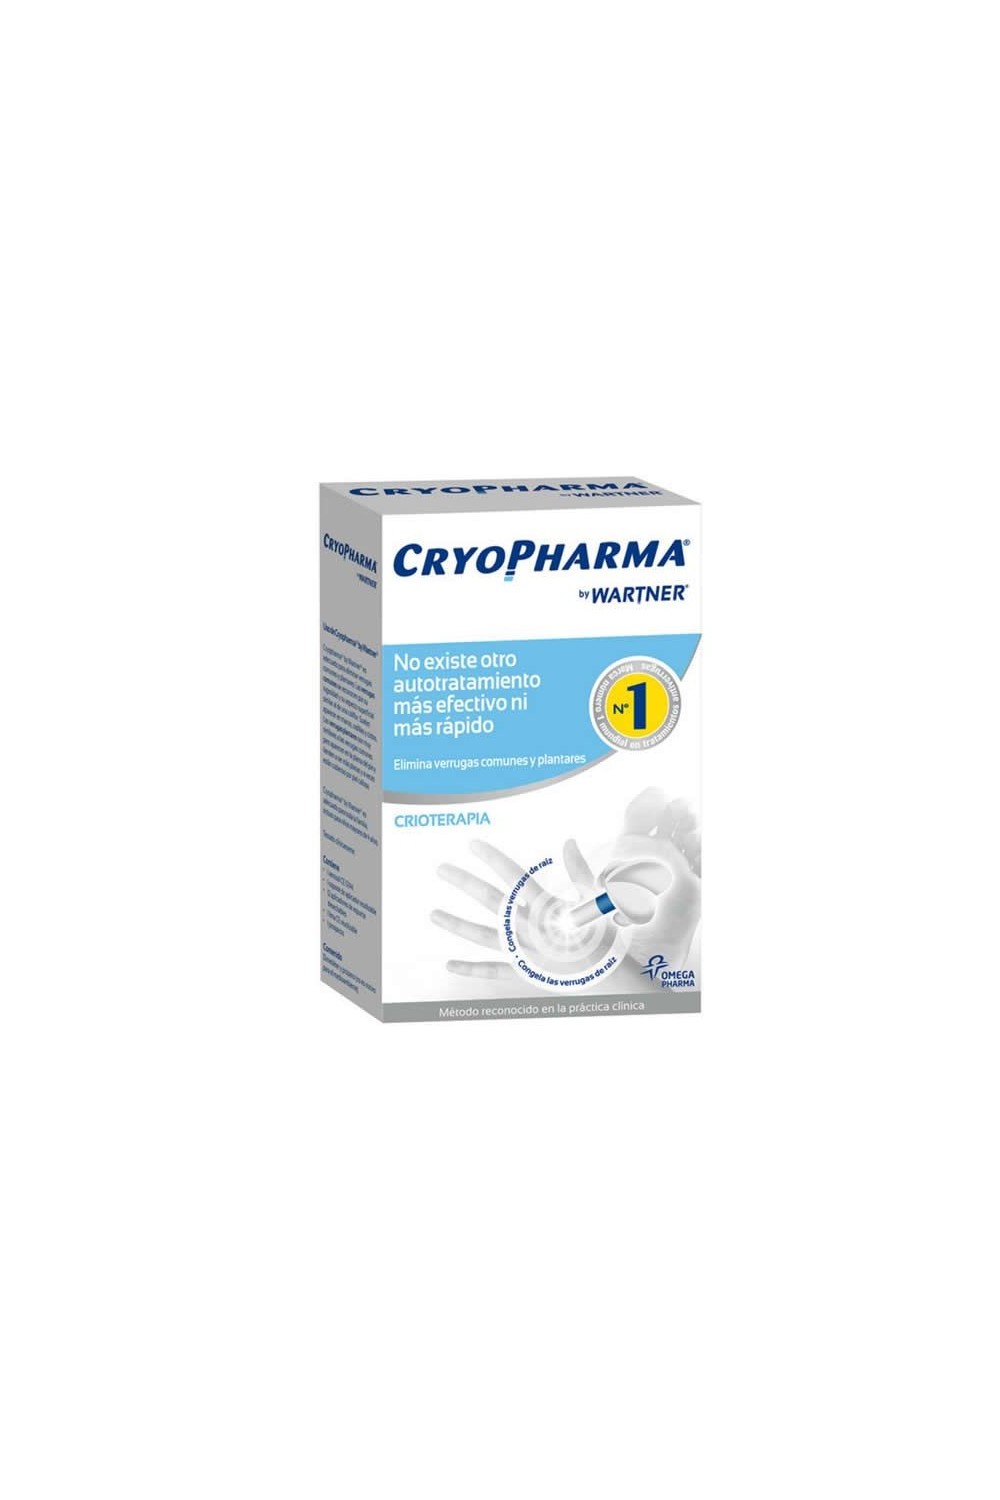 CRYOPHARMA - Cryotharma Wartner For The Removal Of Warts And Verrucas 50ml